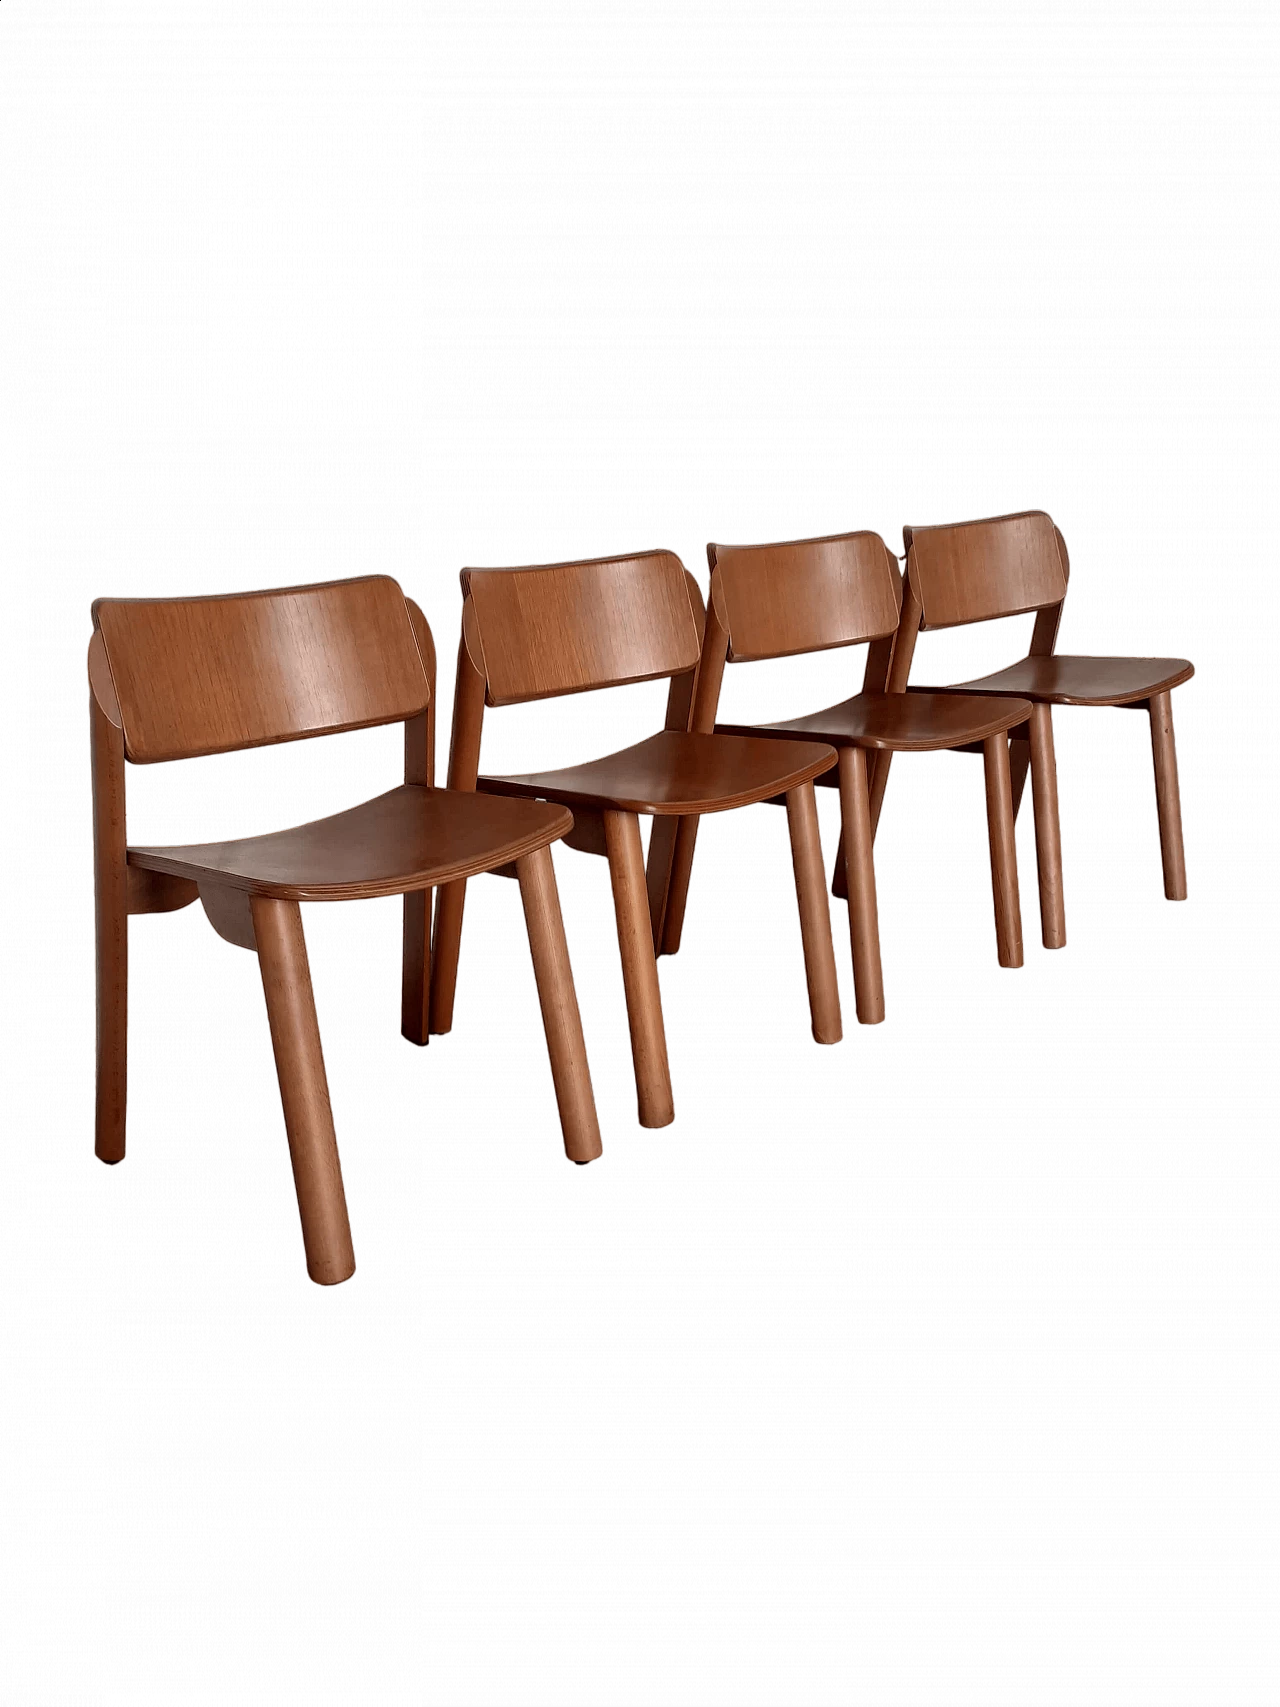 4 Wooden chairs, 1970s 14